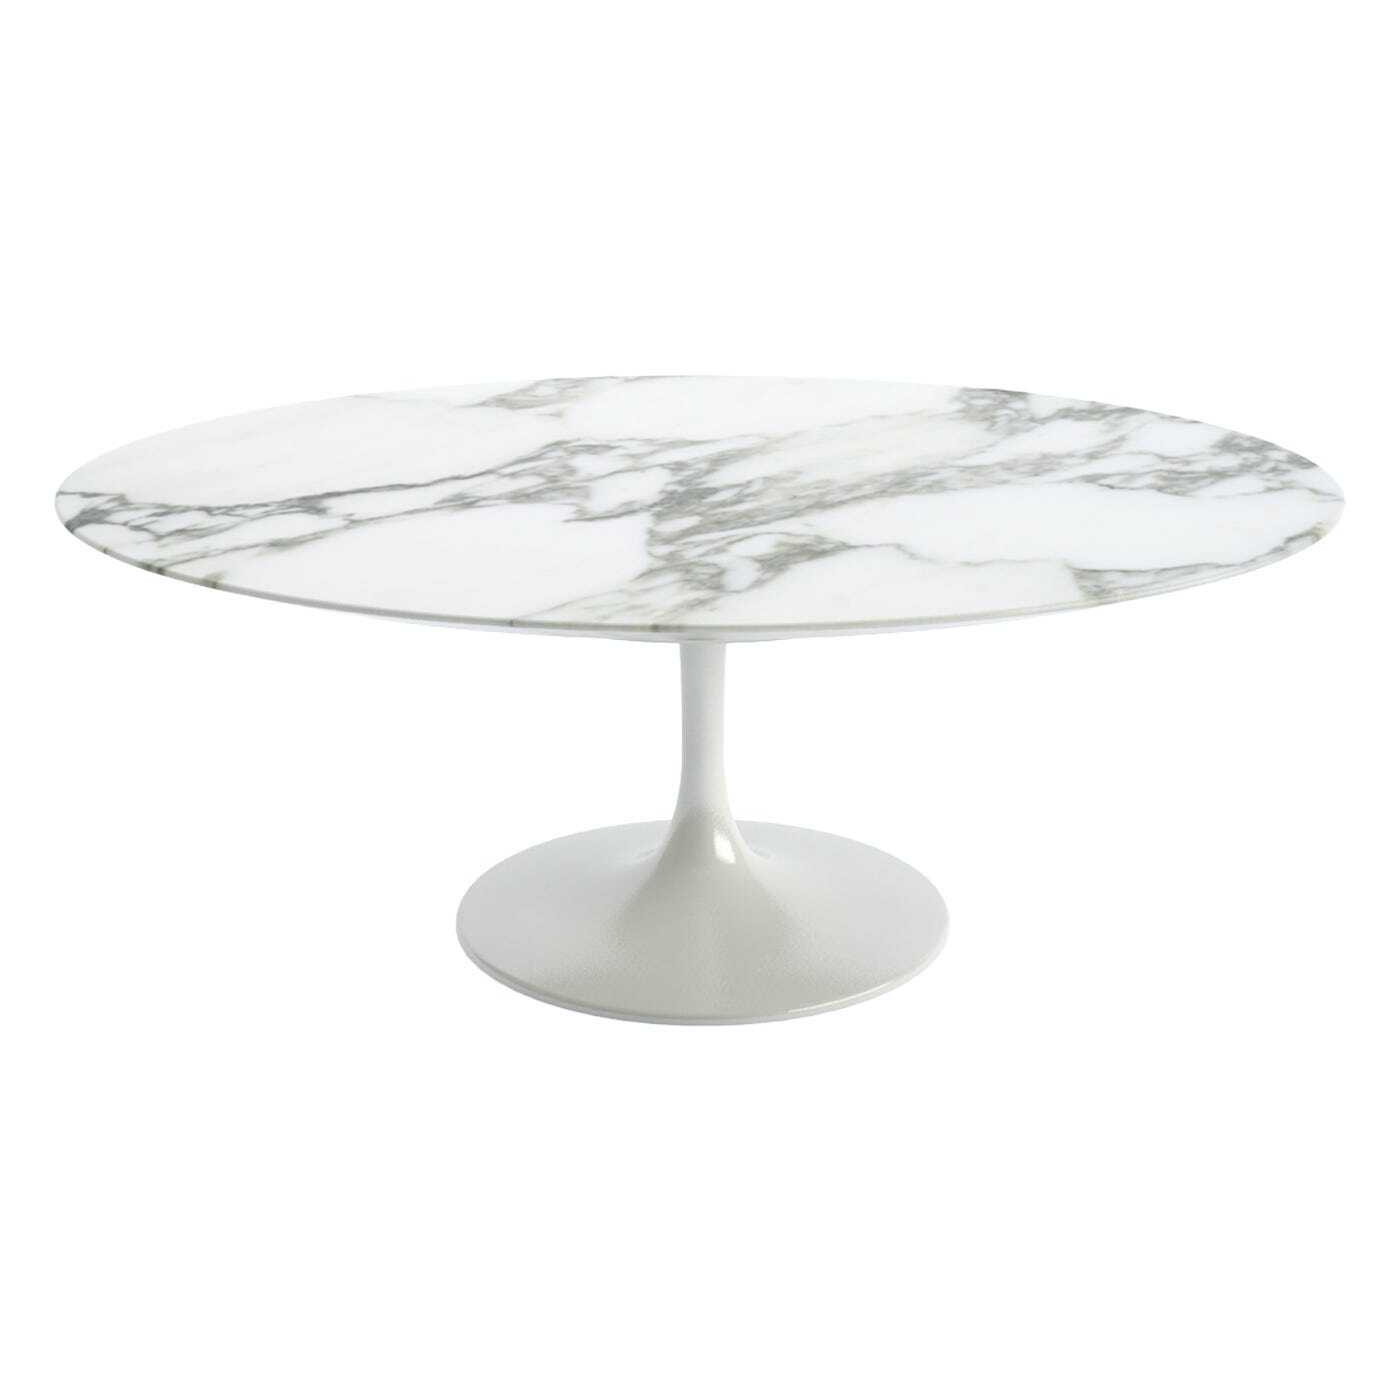 Knoll Saarinen Coffee Table with White Base in Arabescato 107cm